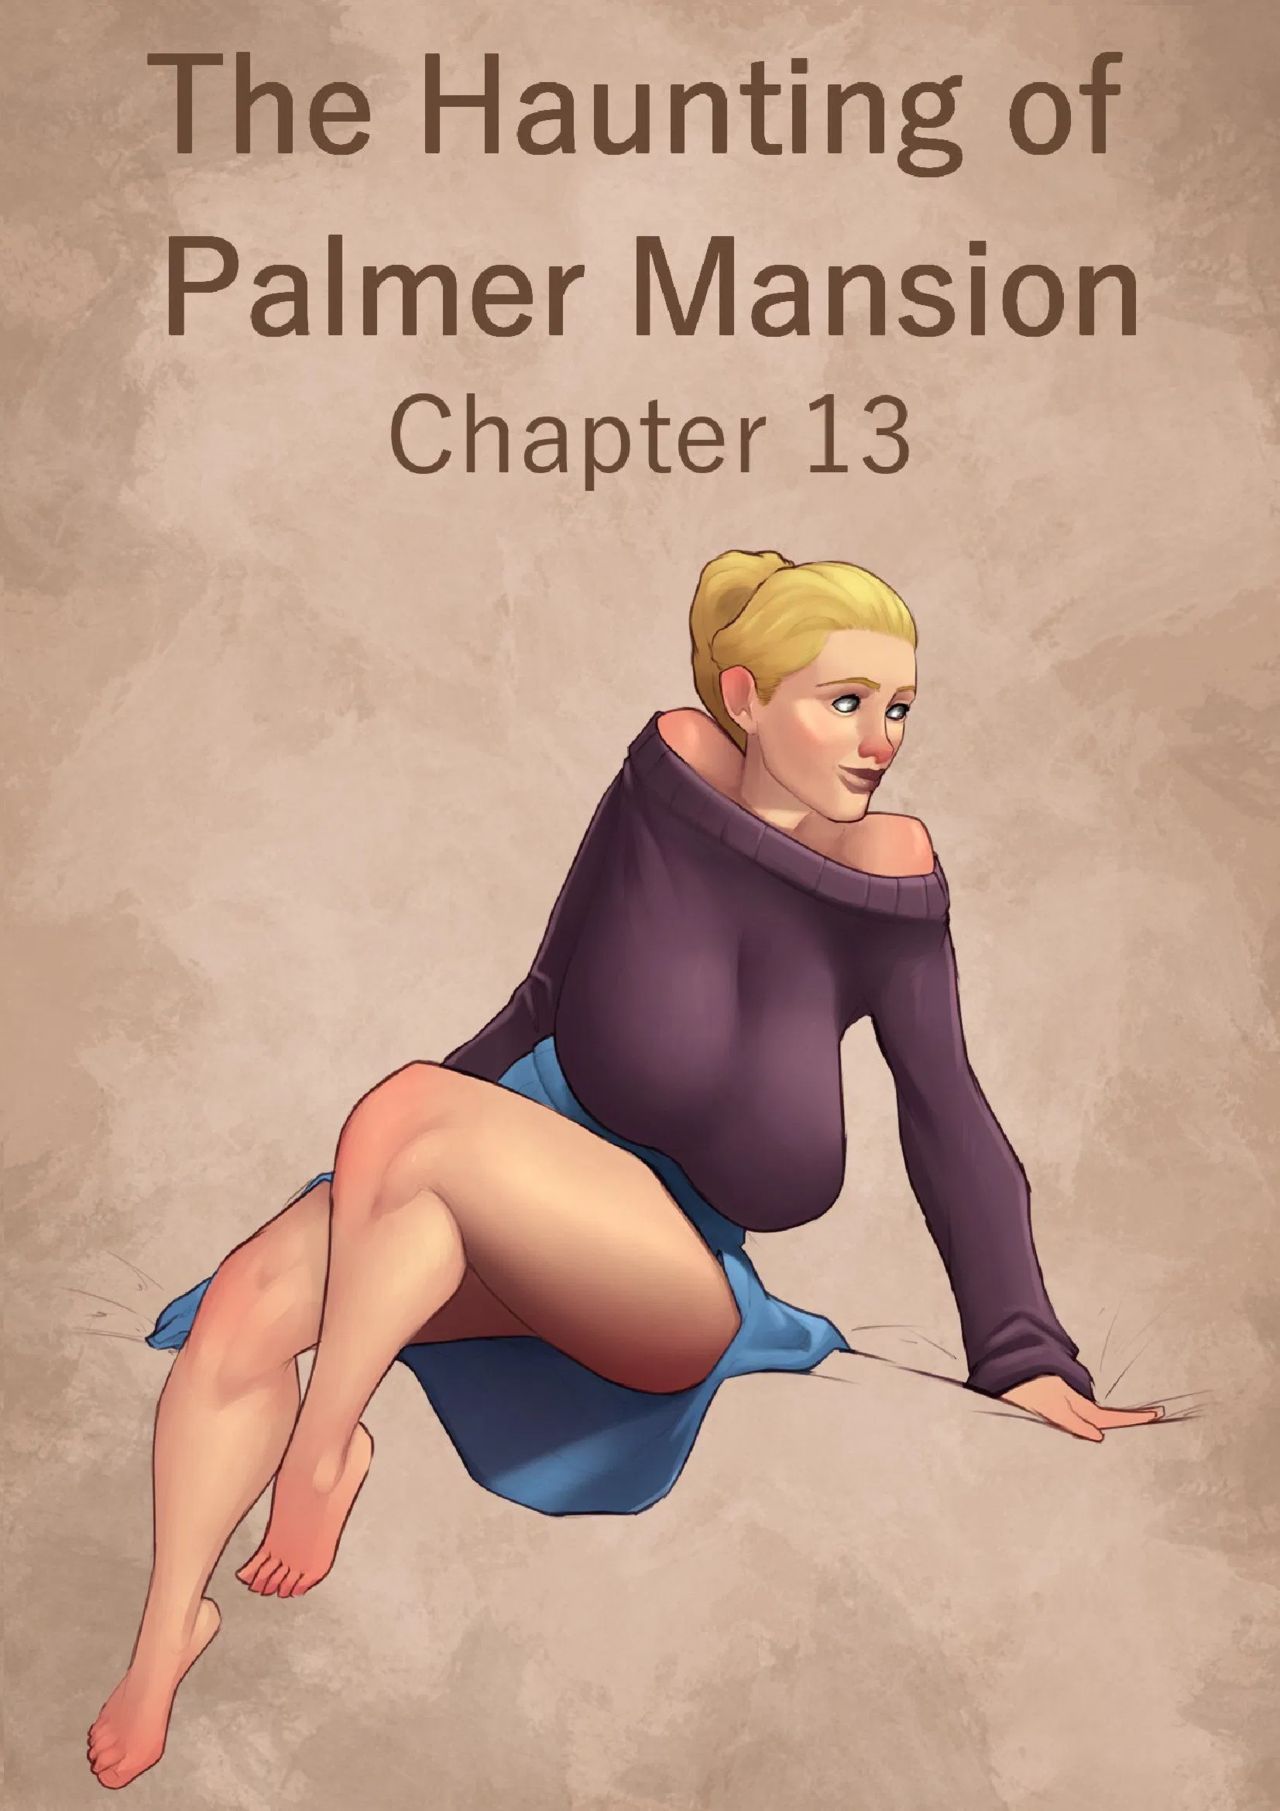 The haunting of palmer mansion